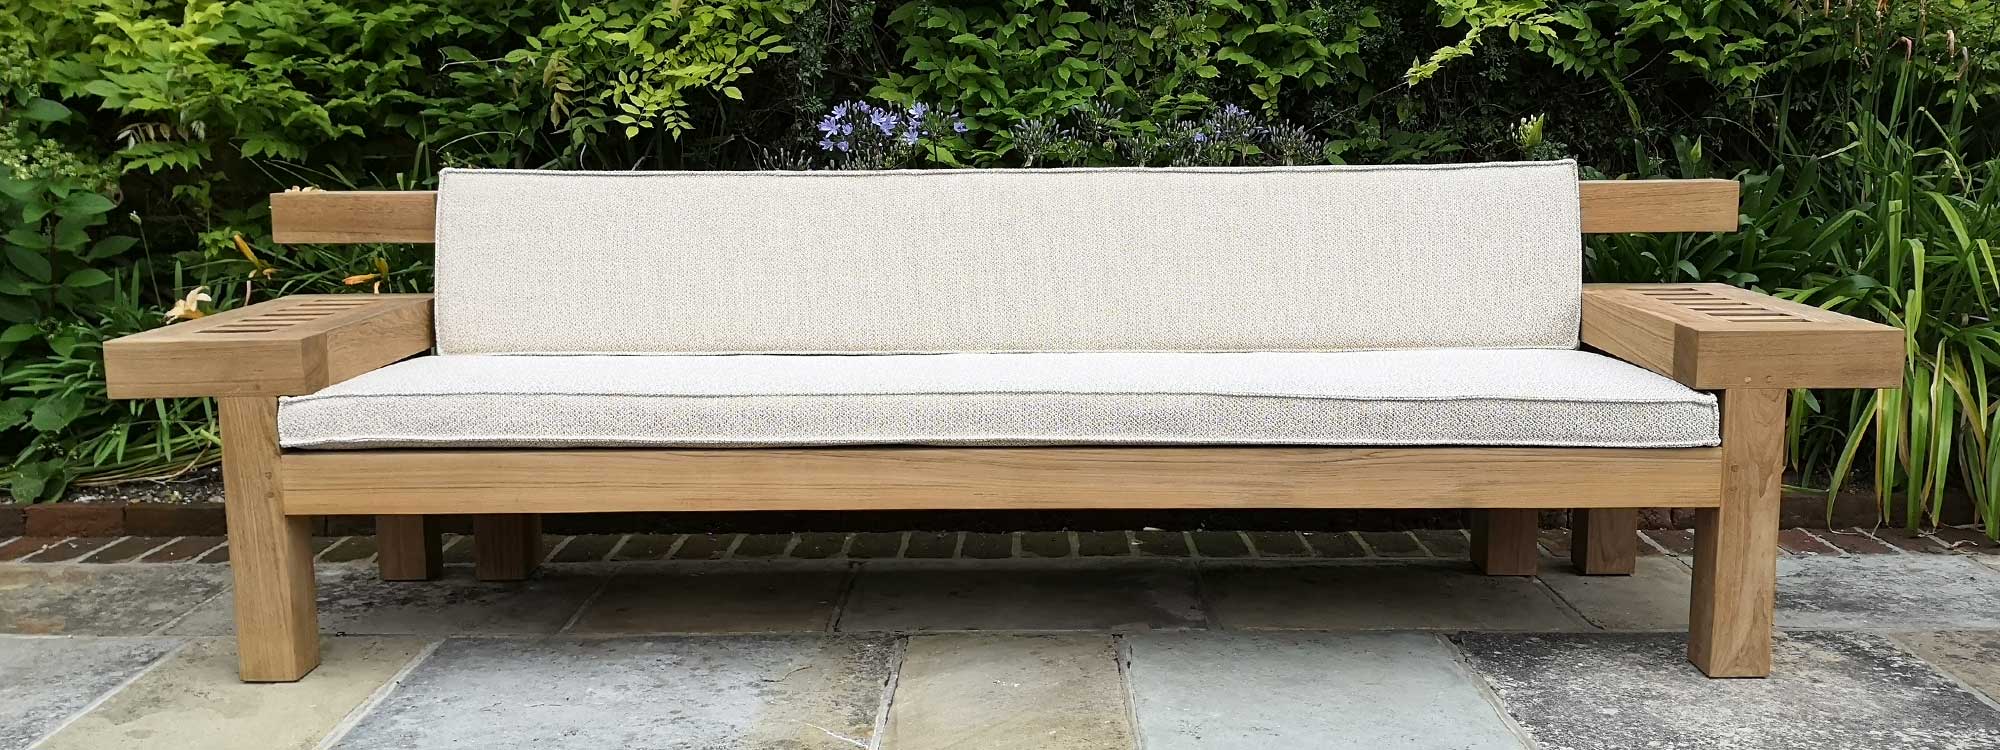 Royal Botania Nara teak sofas are designed by Louis Benech and are optionally available with cushions in a wide range of luxury outdoor fabrics